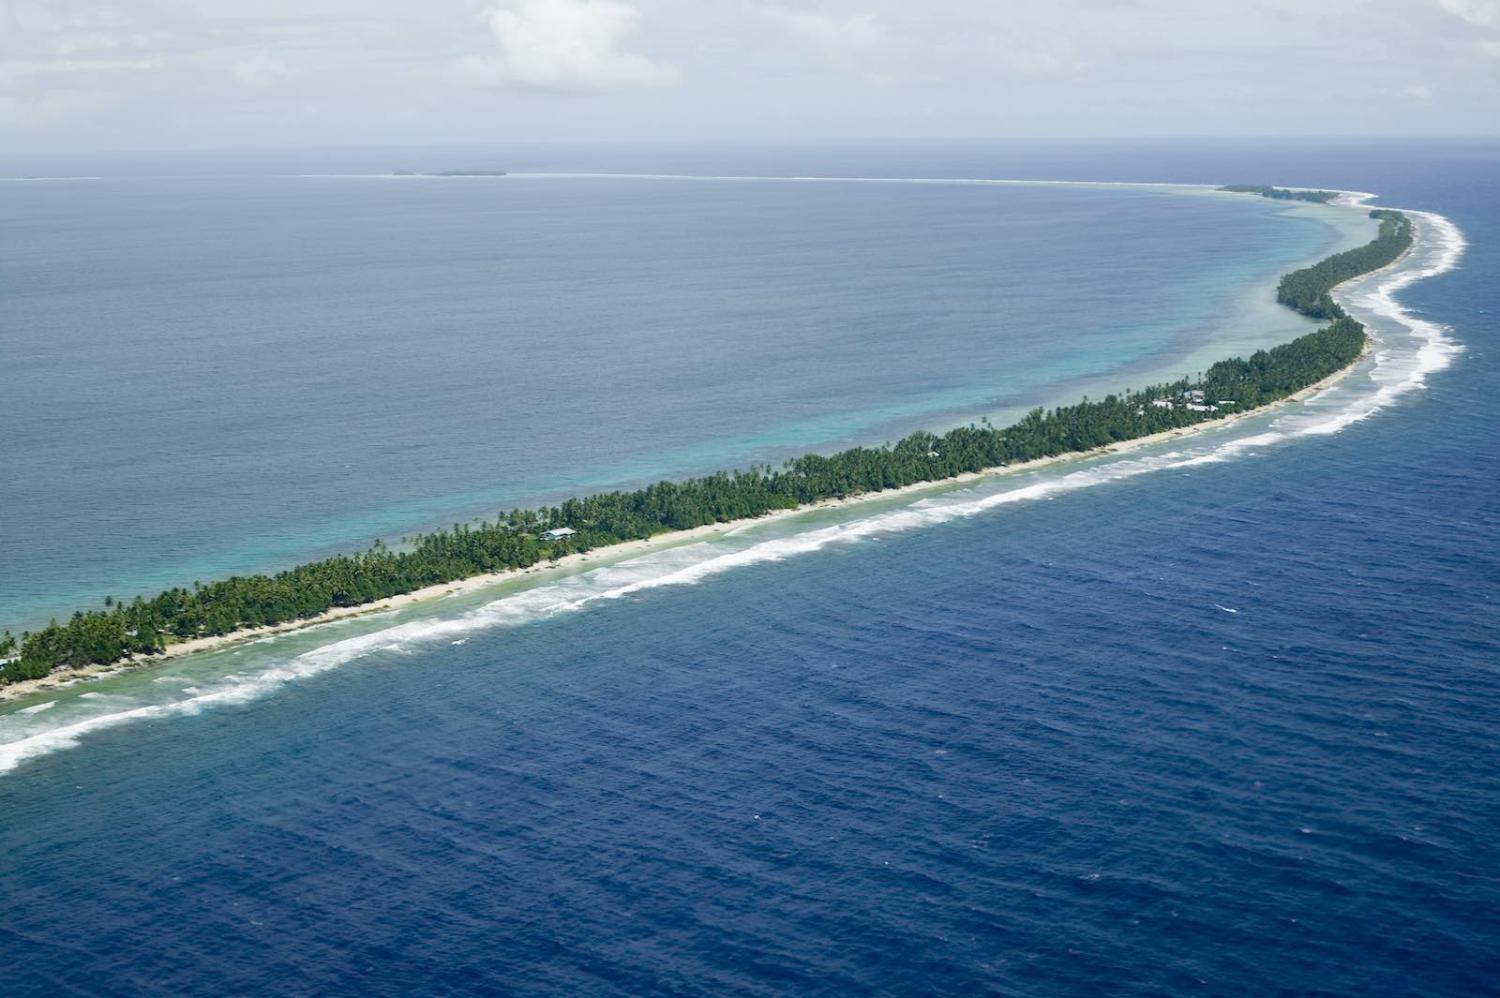 Funafuti Island in Tuvalu, which hosted the Pacific Islands Forum meeting in 2019 (Ashley Cooper/Getty Images)